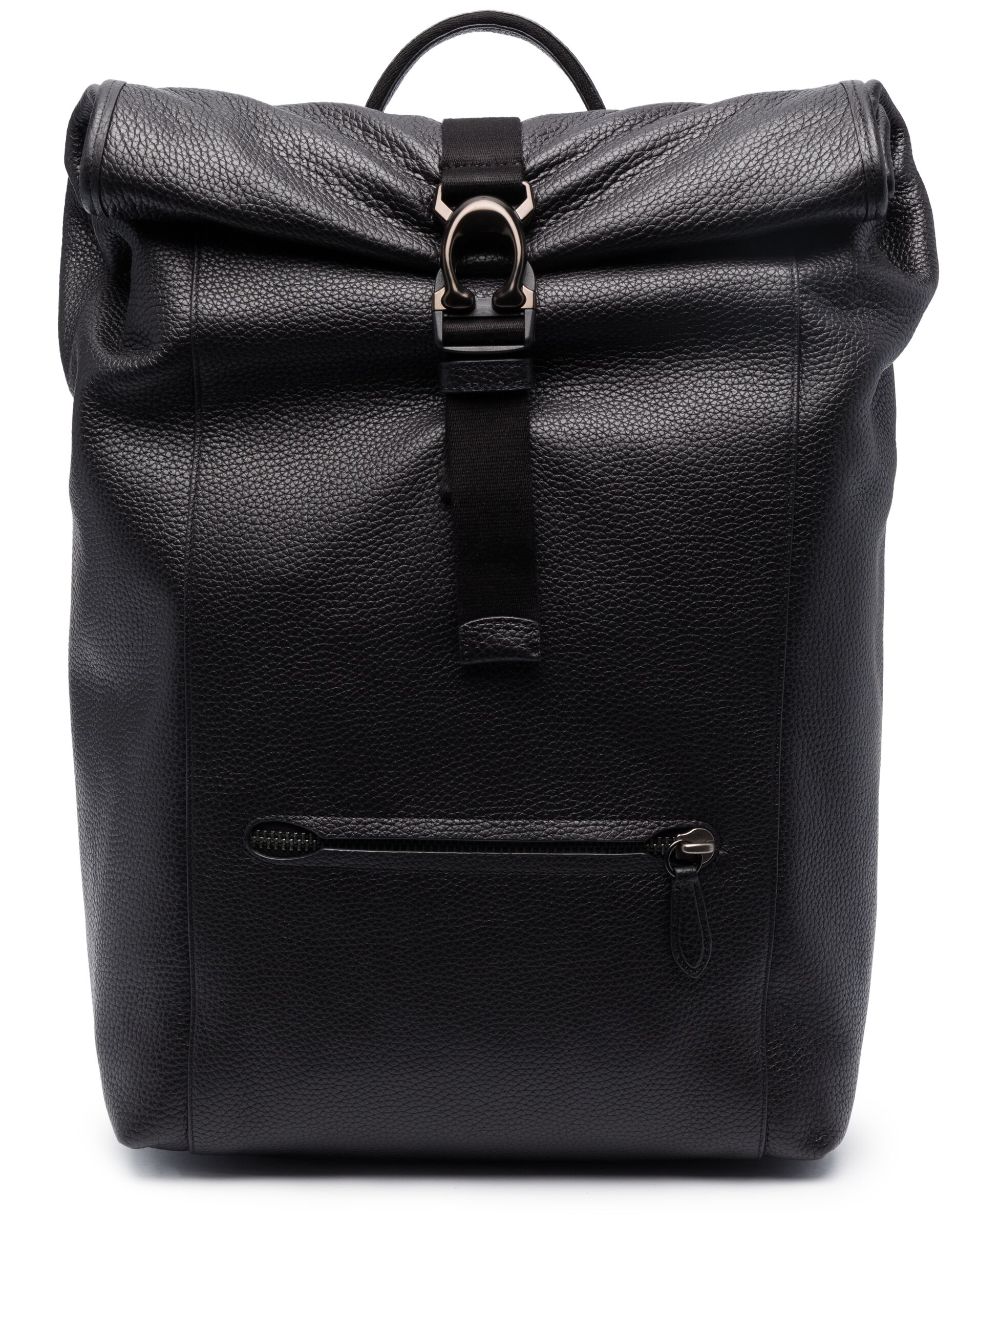 Coach roll-top leather backpack - Black von Coach